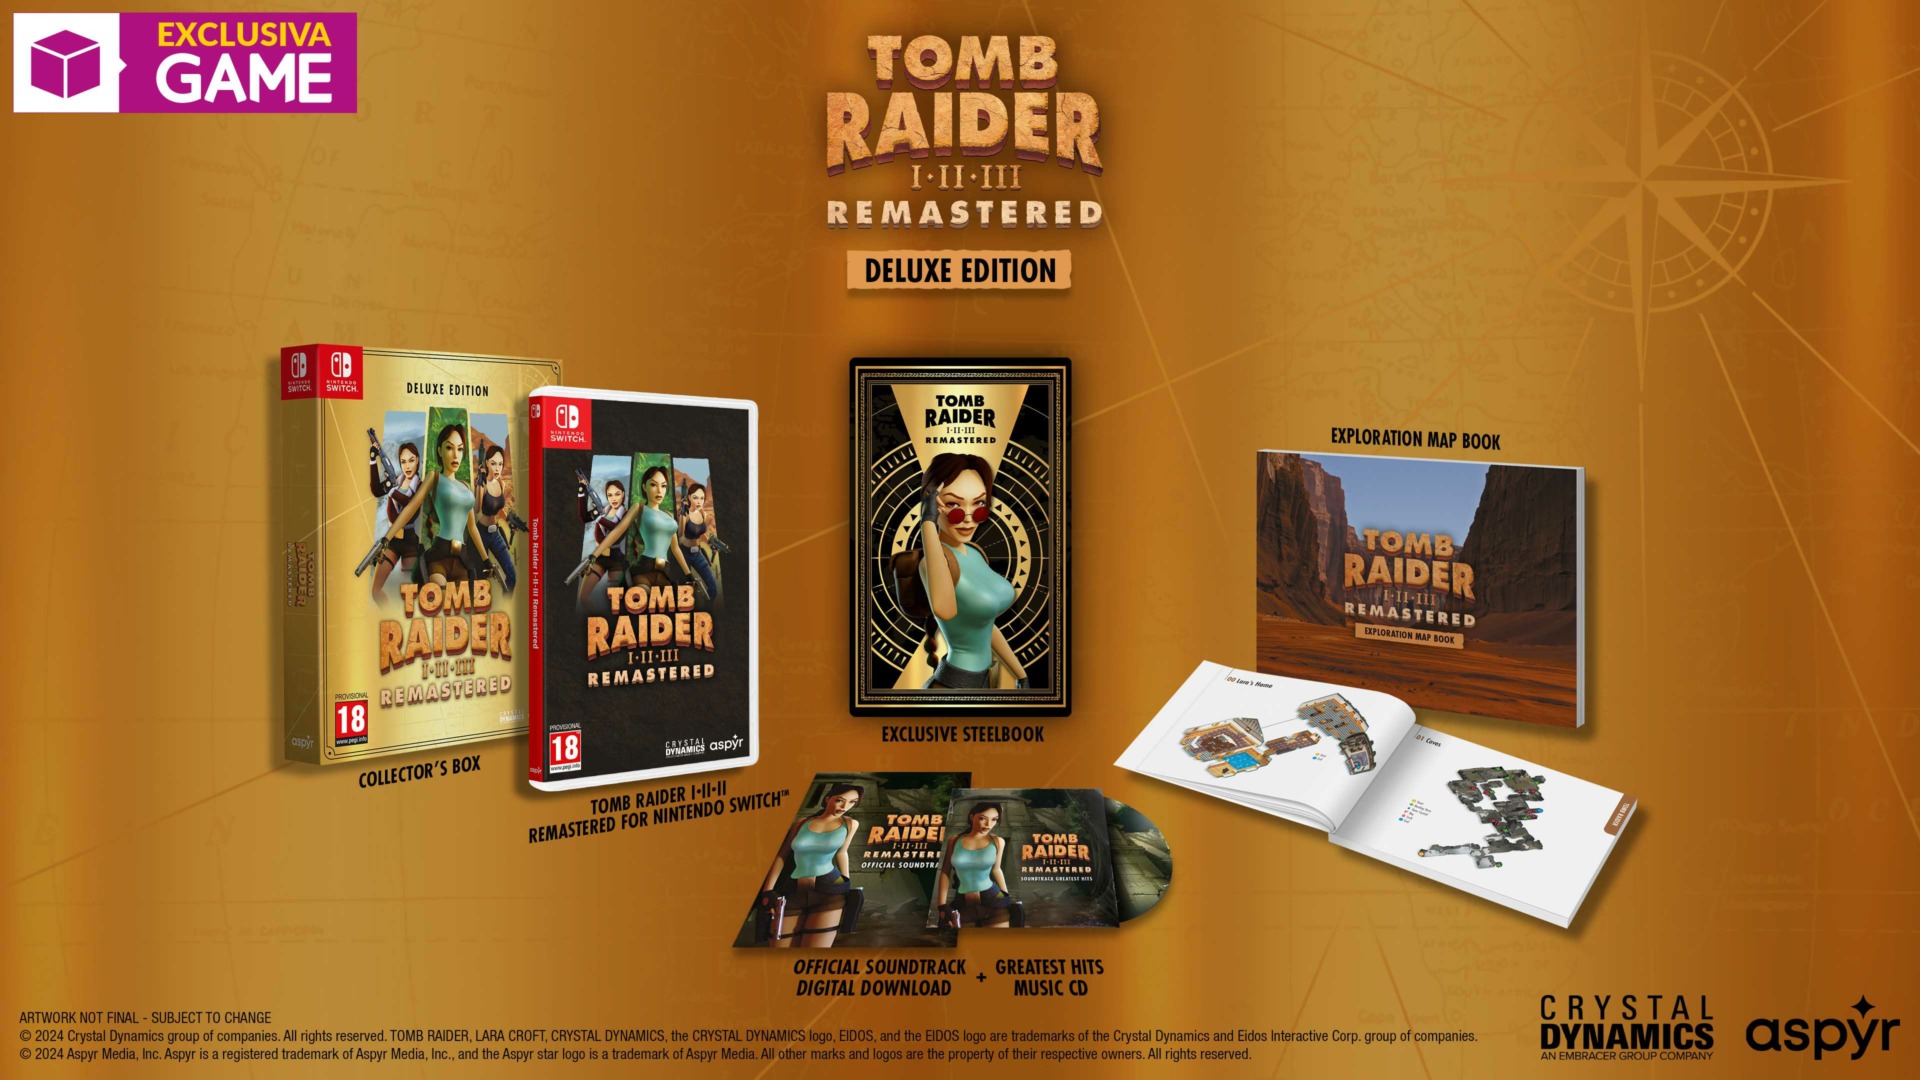 Tomb Raider Remastered I III DELUXE EDITION exclusiva GAME NSW